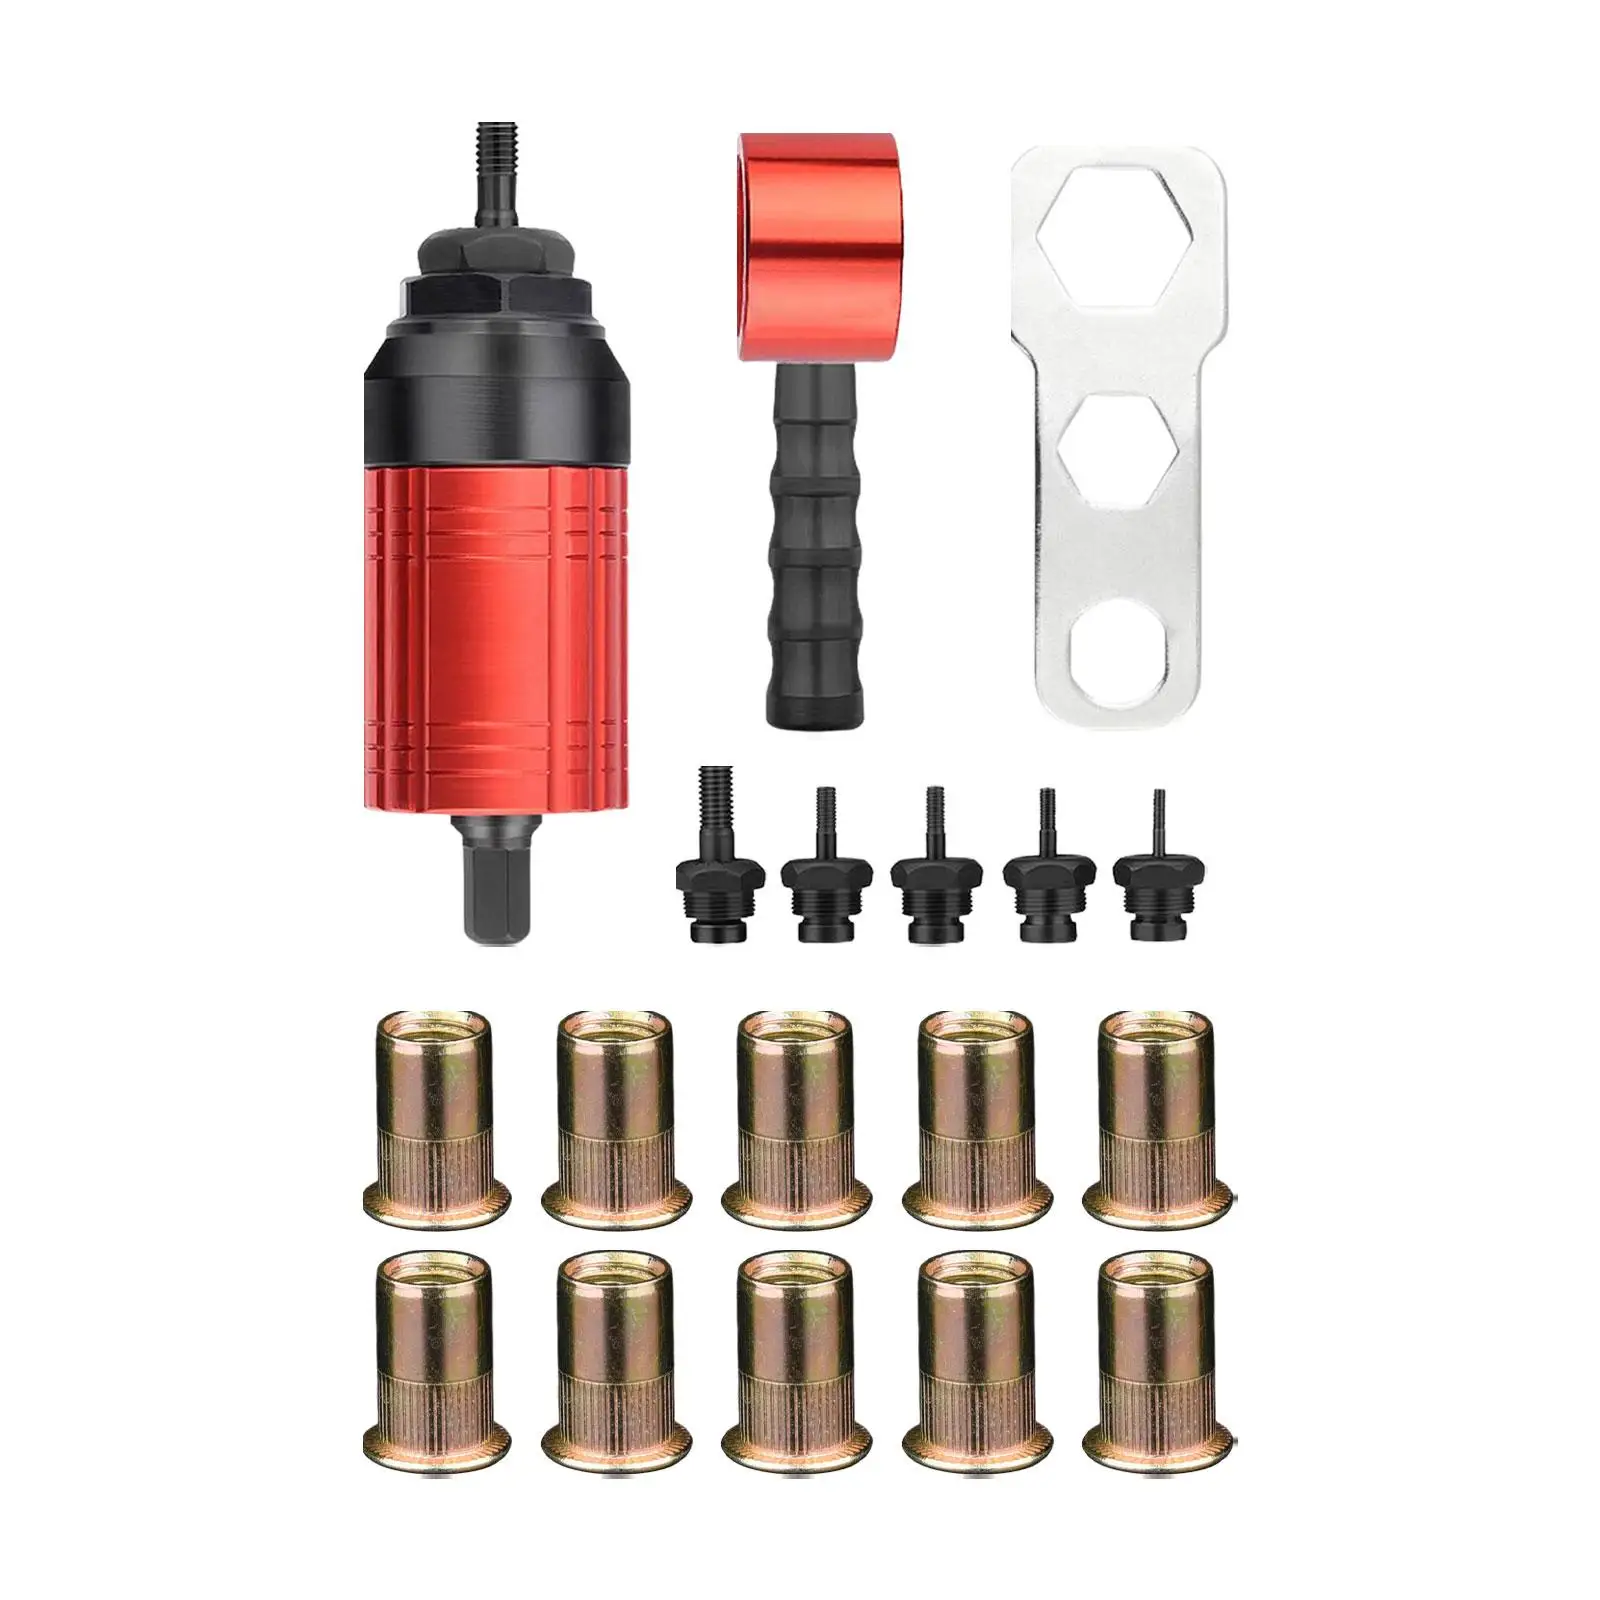 Rivet Nut Drill Adaptor Nut Tool for Ship Furniture Electrical Appliance